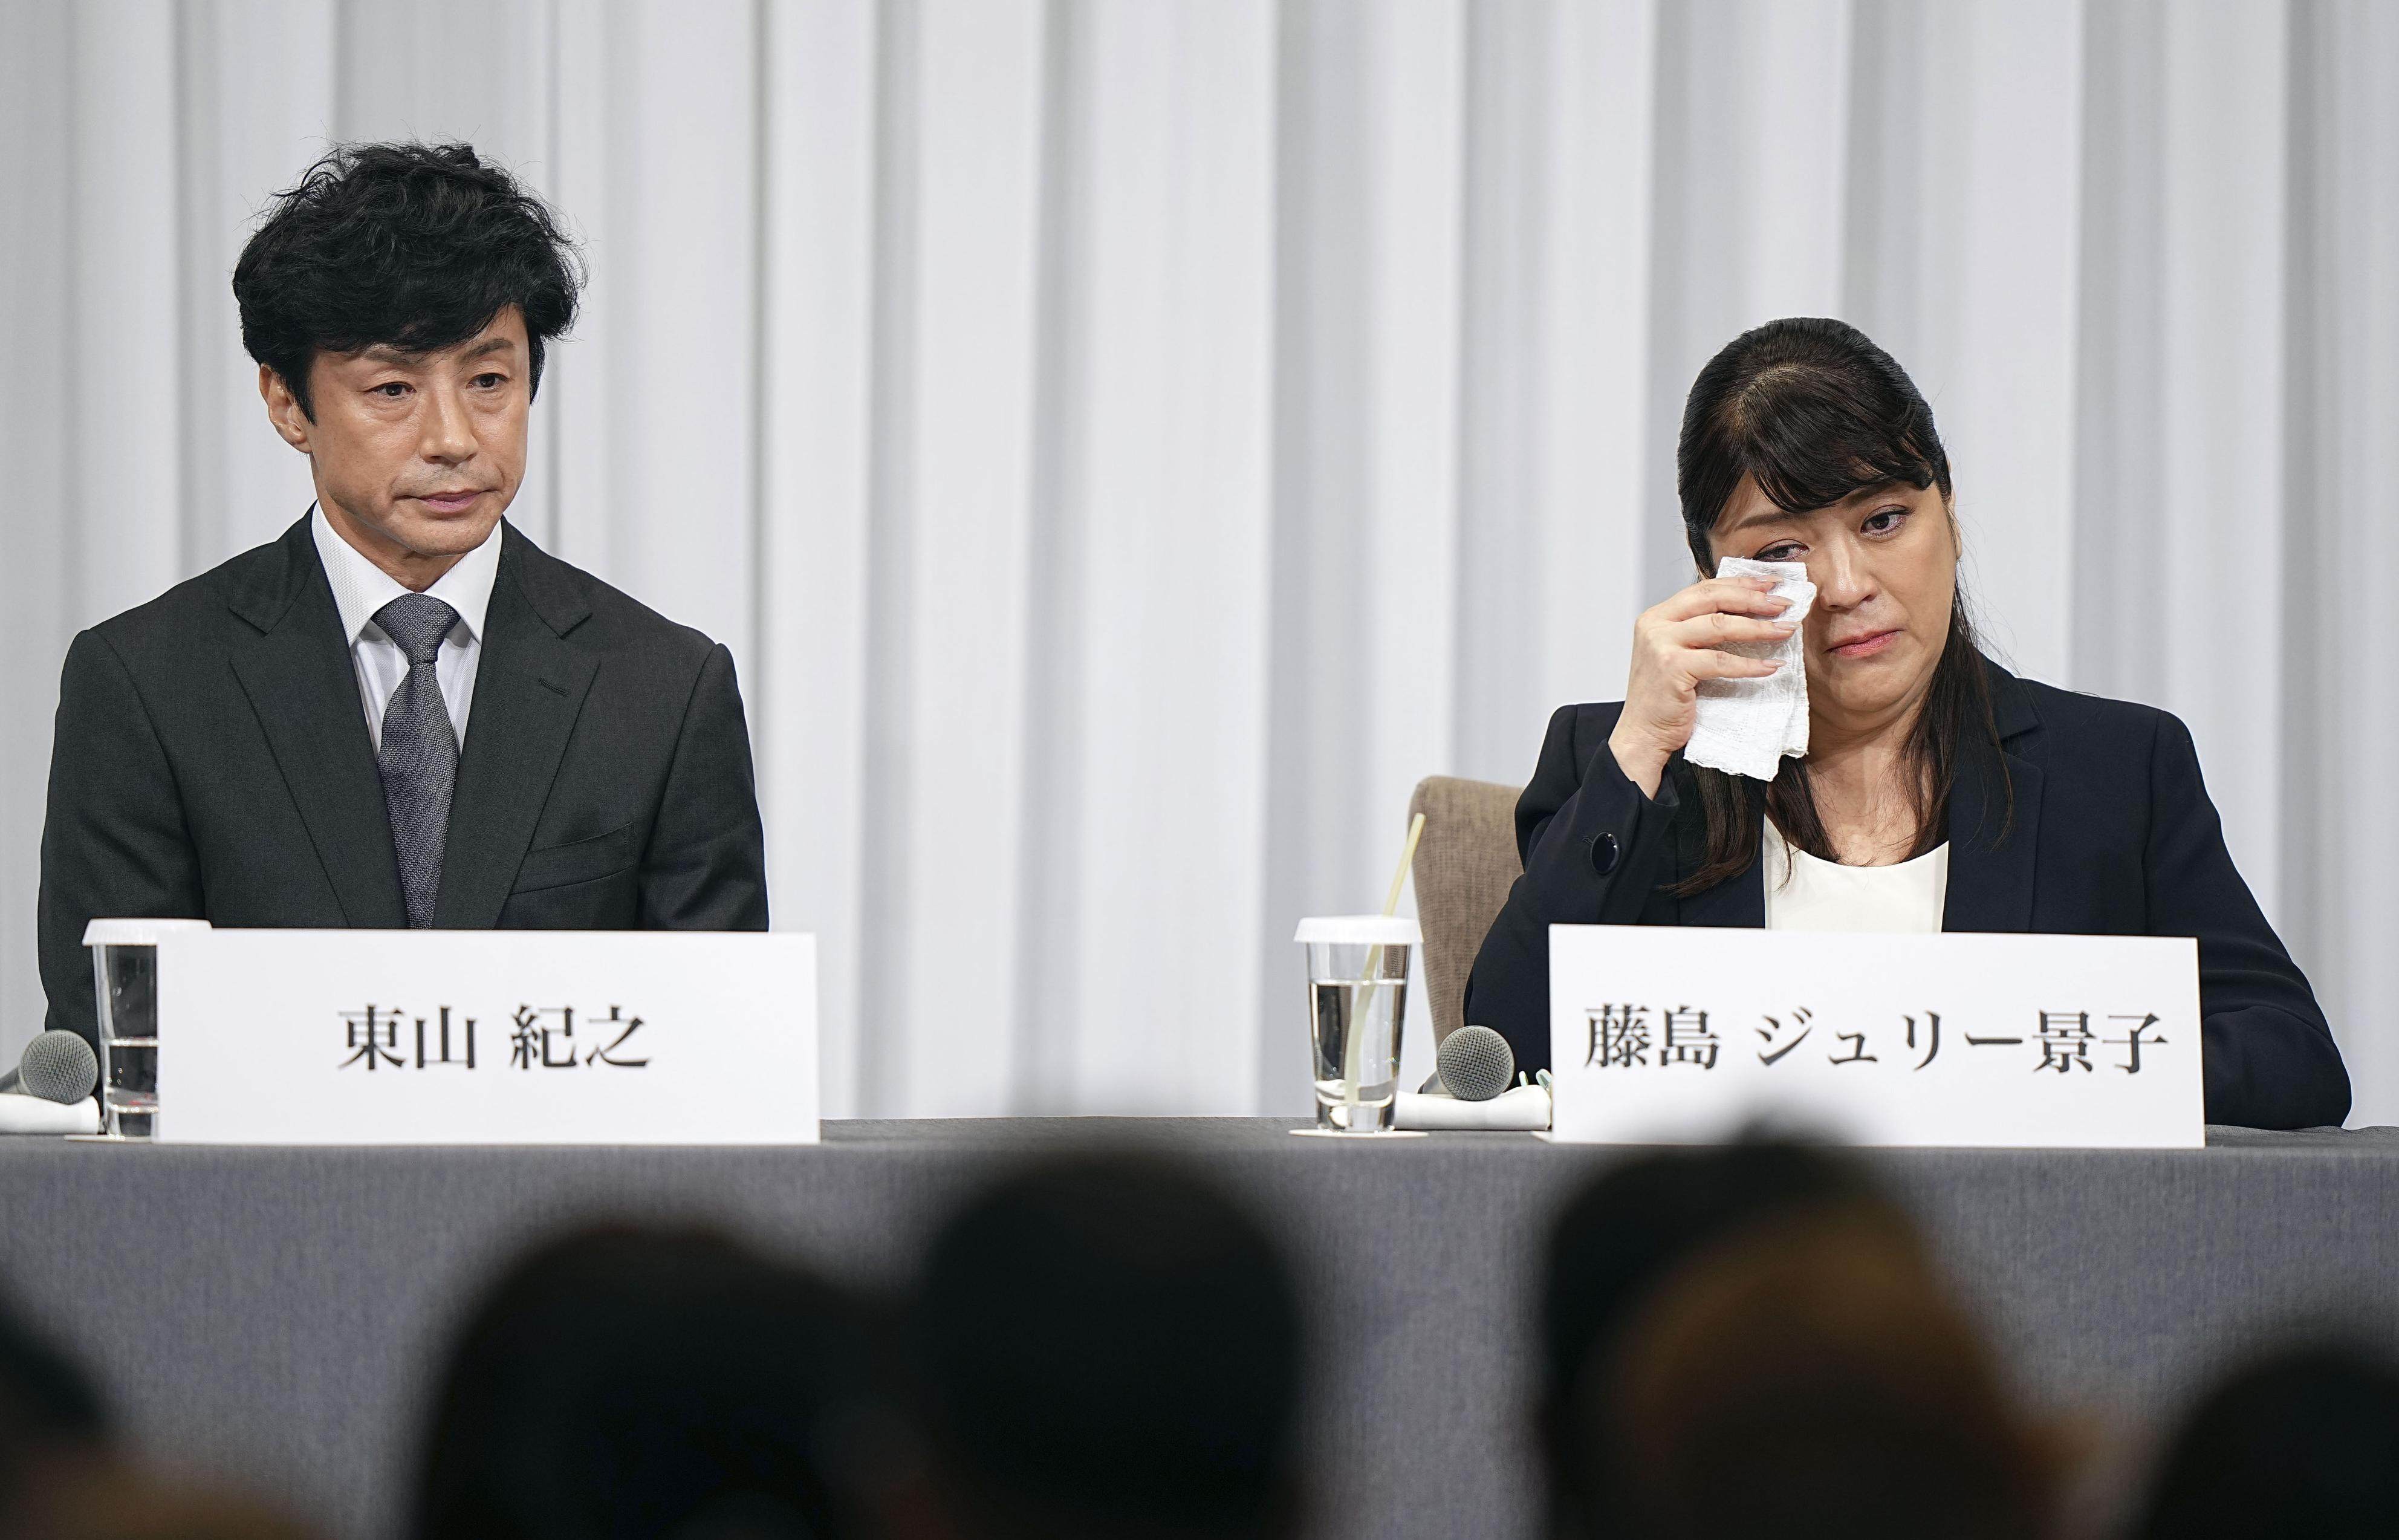 Julie Keiko Fujishima, former president of Johnny and Associates, wipes away tears during a Tokyo press conference on September 7, amid allegations of child sexual abuse by the agency’s late founder and her uncle, Johnny Kitagawa. Beside her is the agency’s new president, Noriyuki Higashiyama. Photo: Kyodo